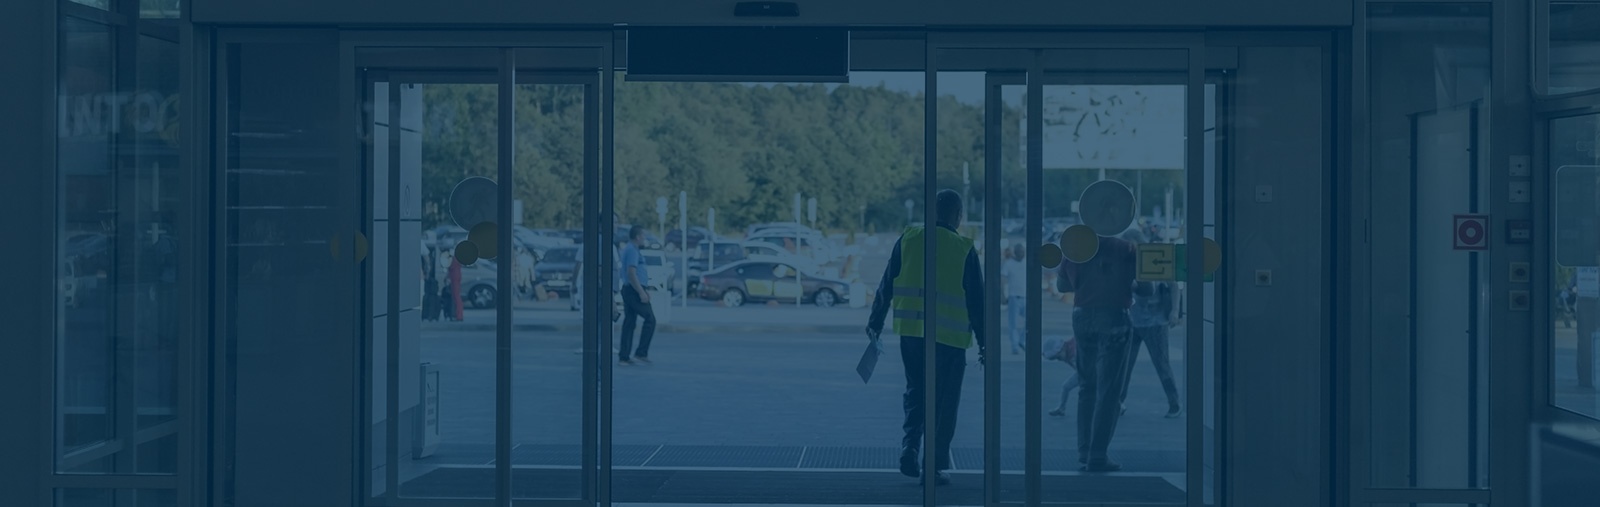 Access Control, Automatic Doors & Security Camera Installation in Brantford, ON